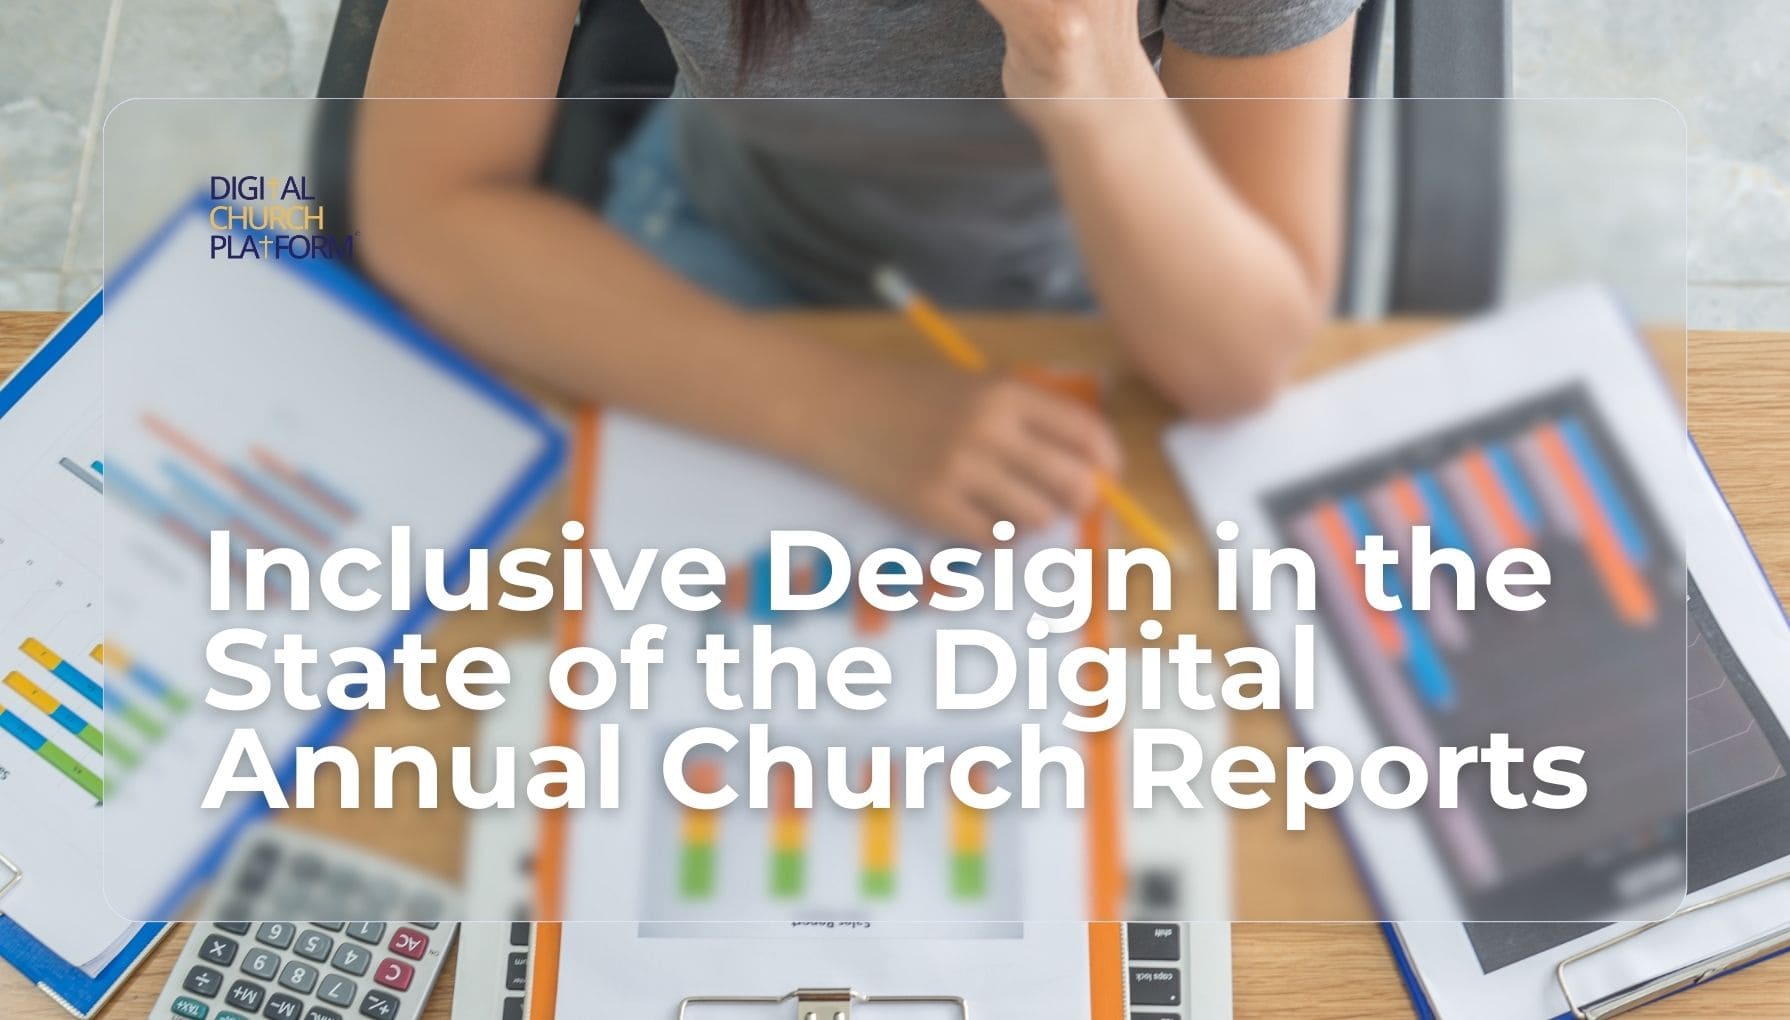 Inclusive Design: Colour-Blind-Friendly Approach in Church Reports